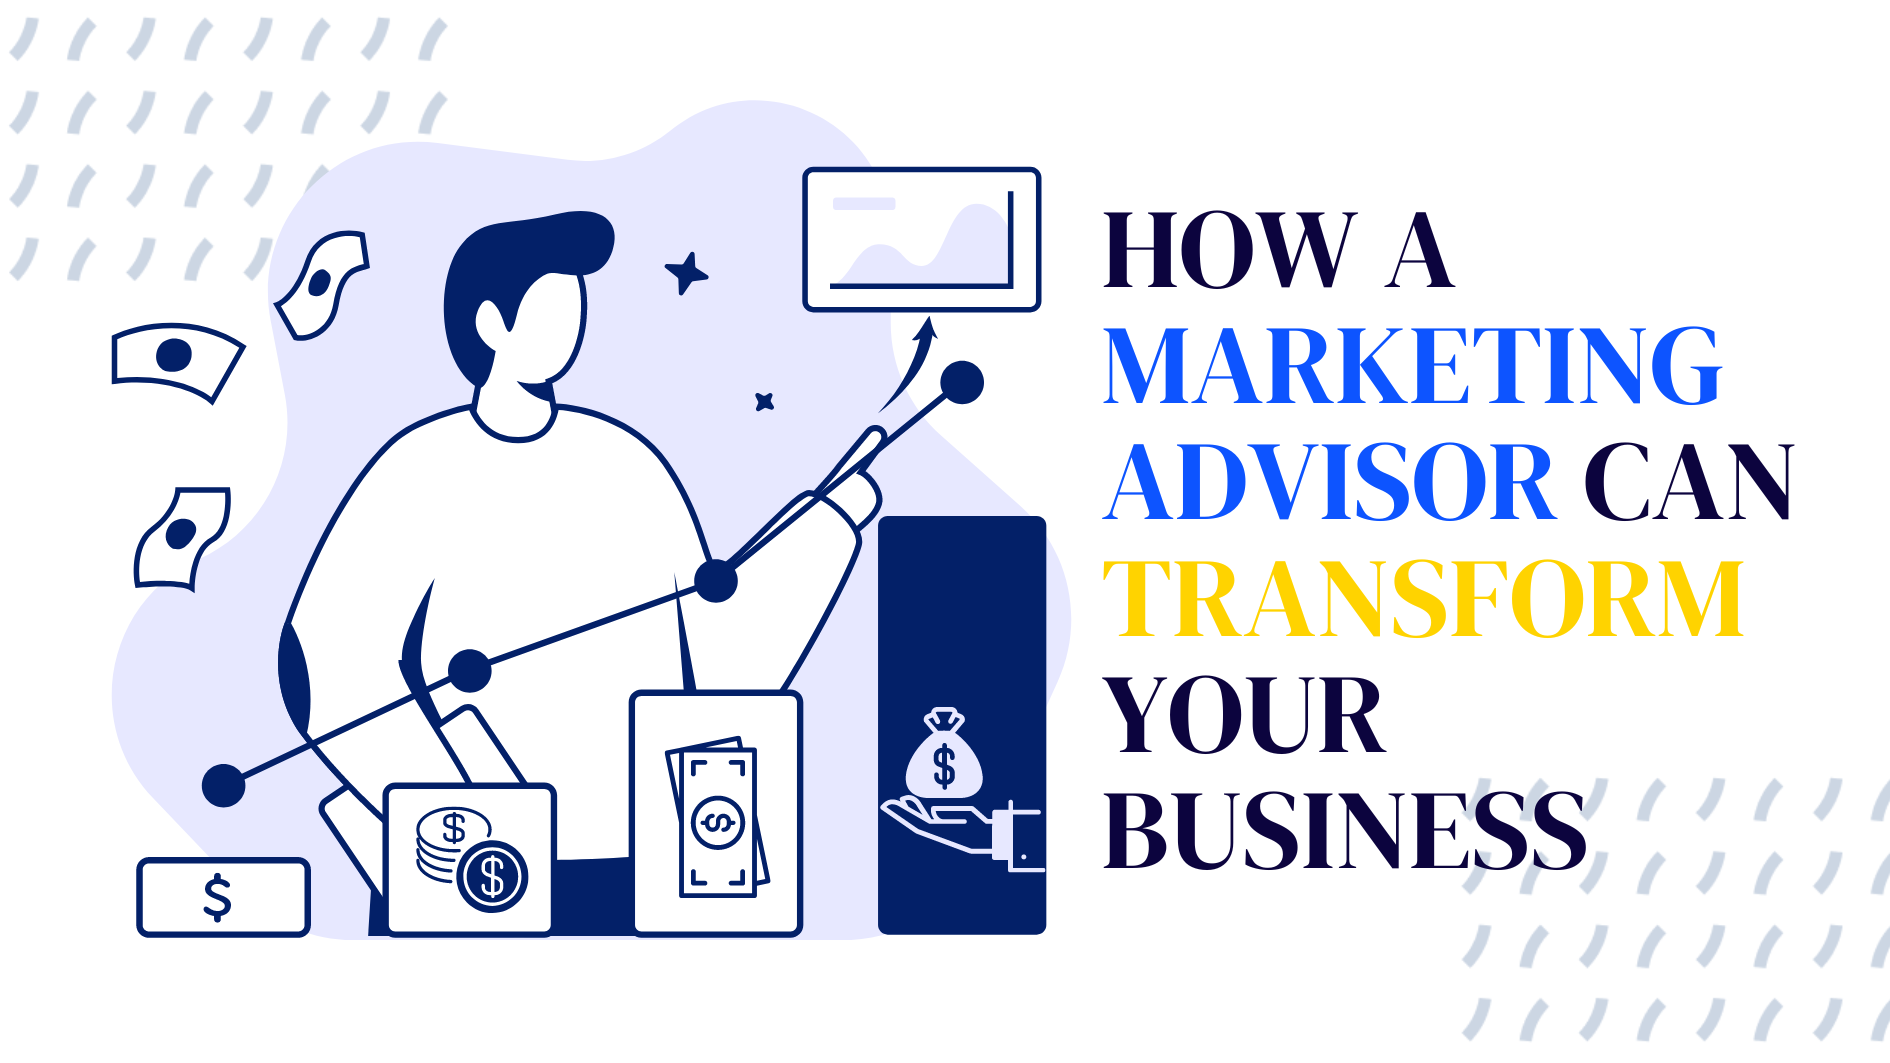 Accelerate Your Growth How a Marketing Advisor Can Transform Your Business